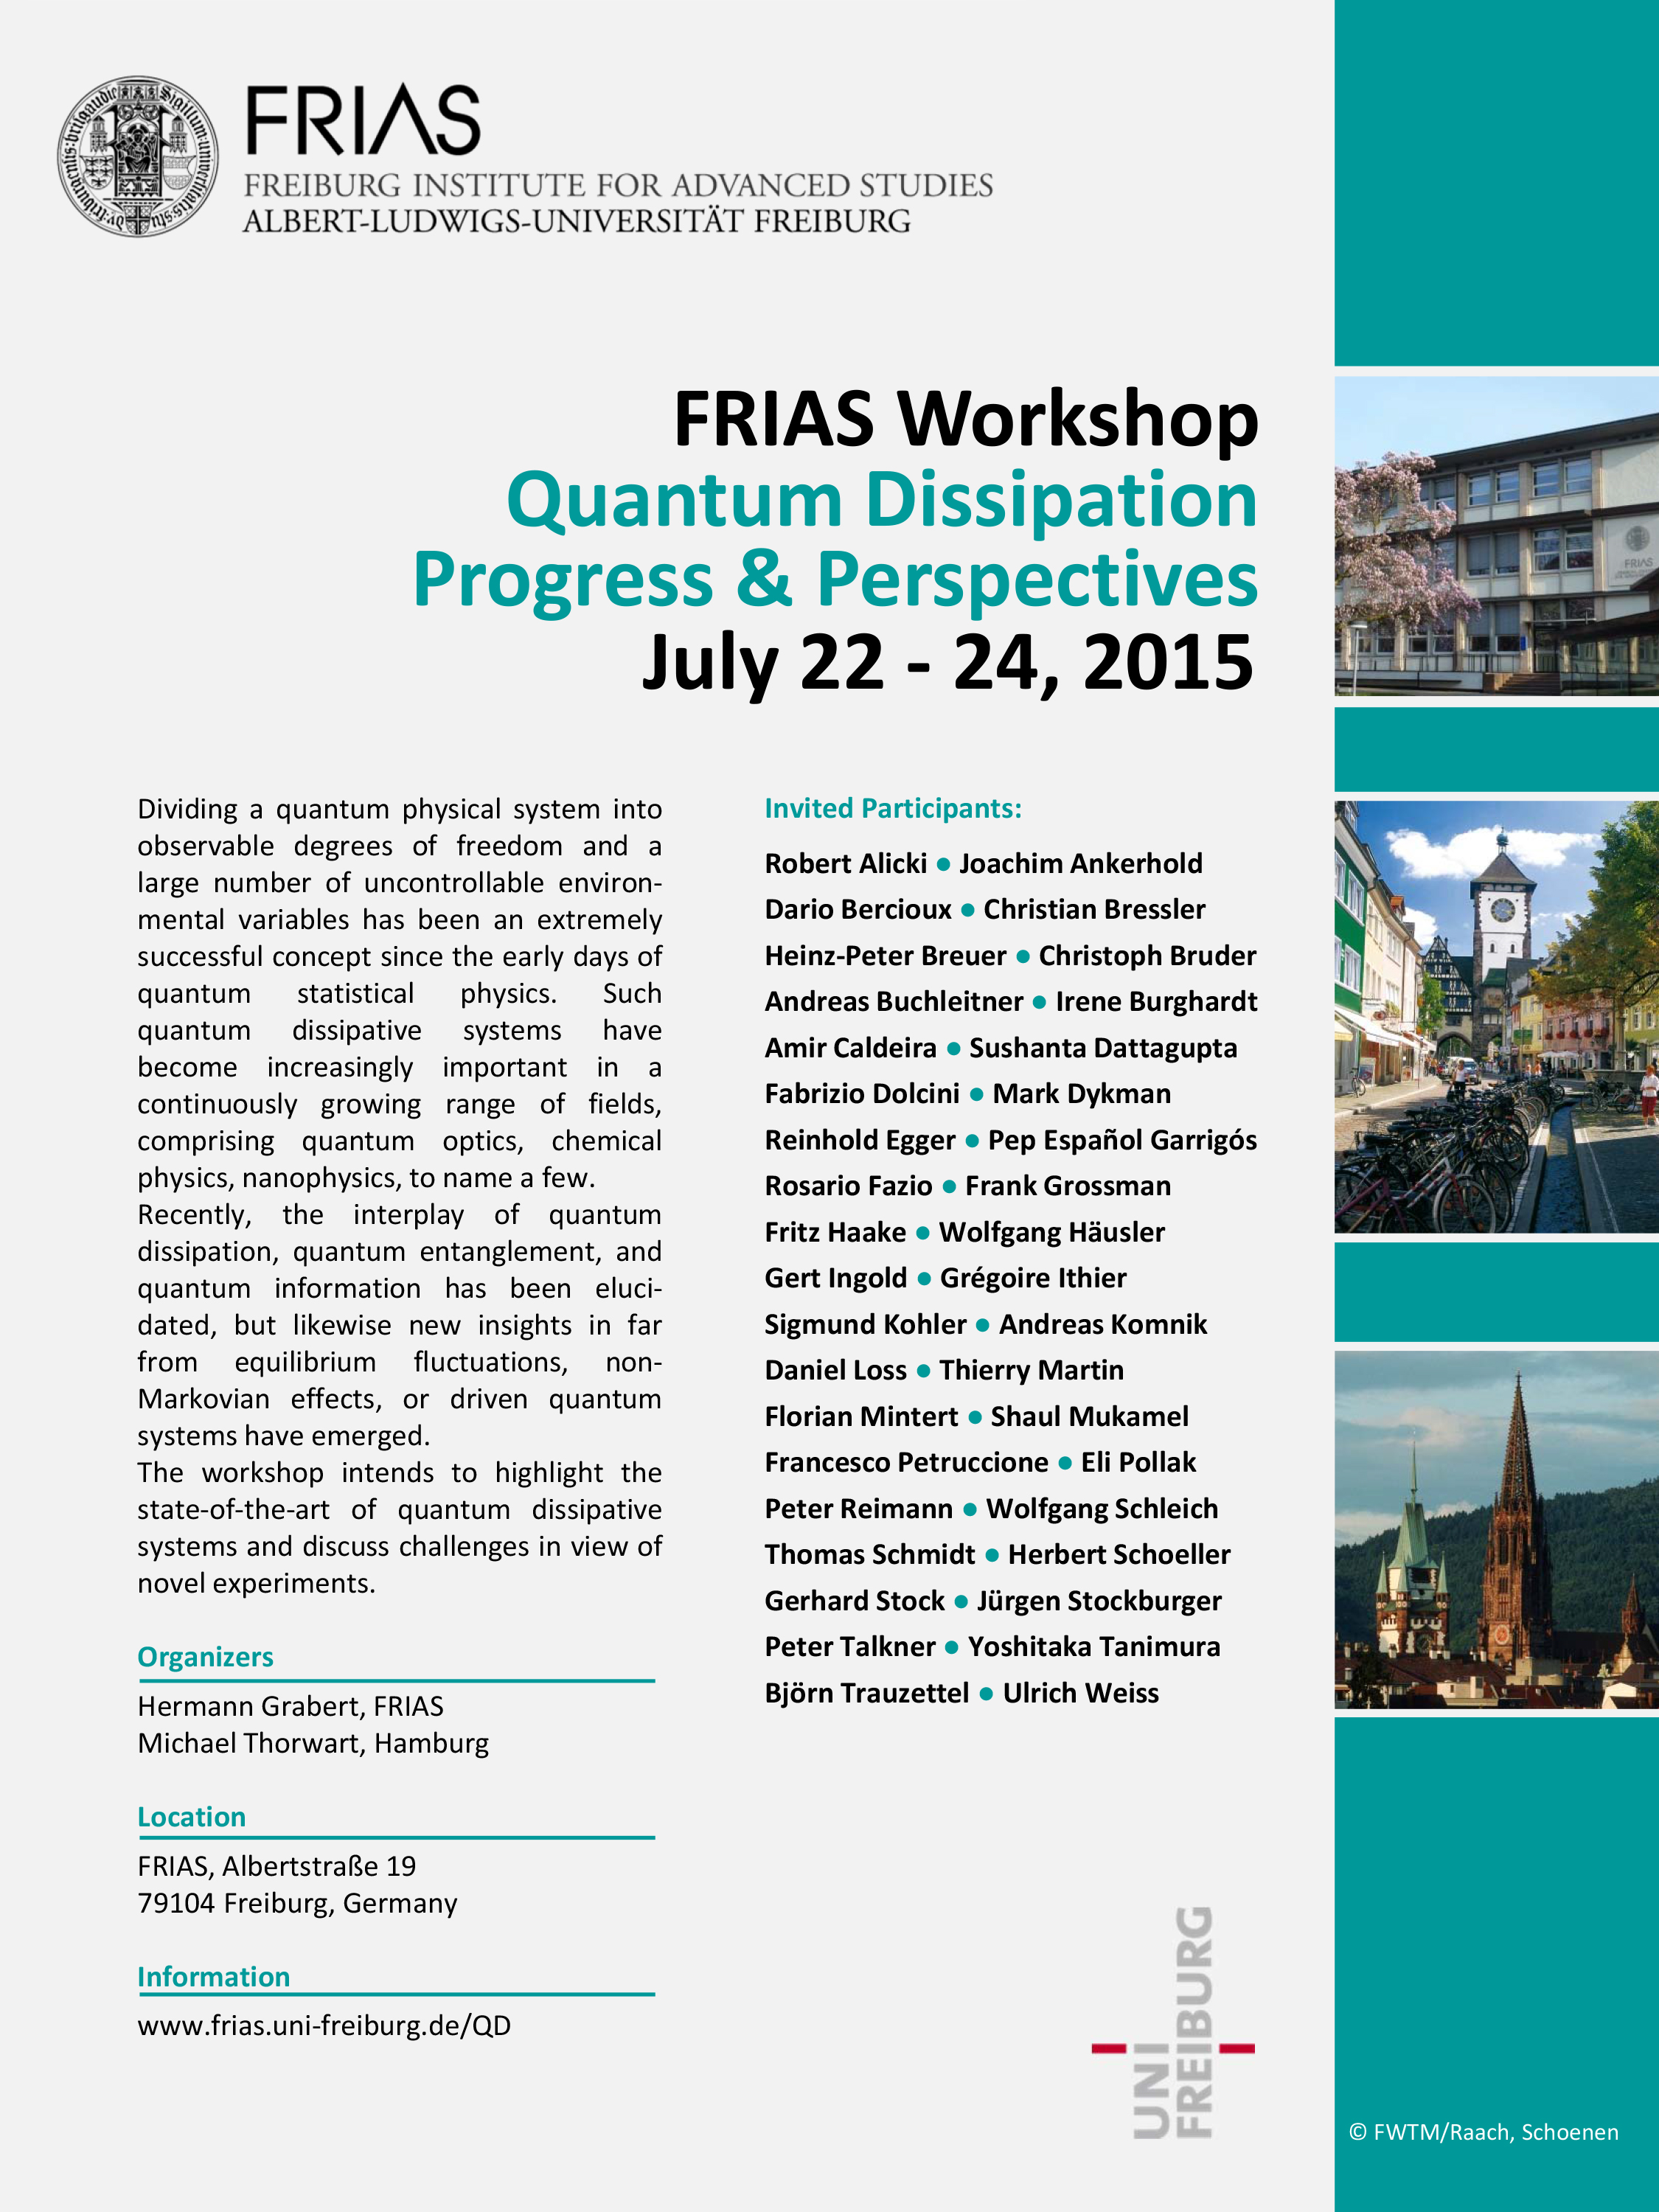 Quantum Dissipation: Progress and Perspectives, July 22-24, 2015